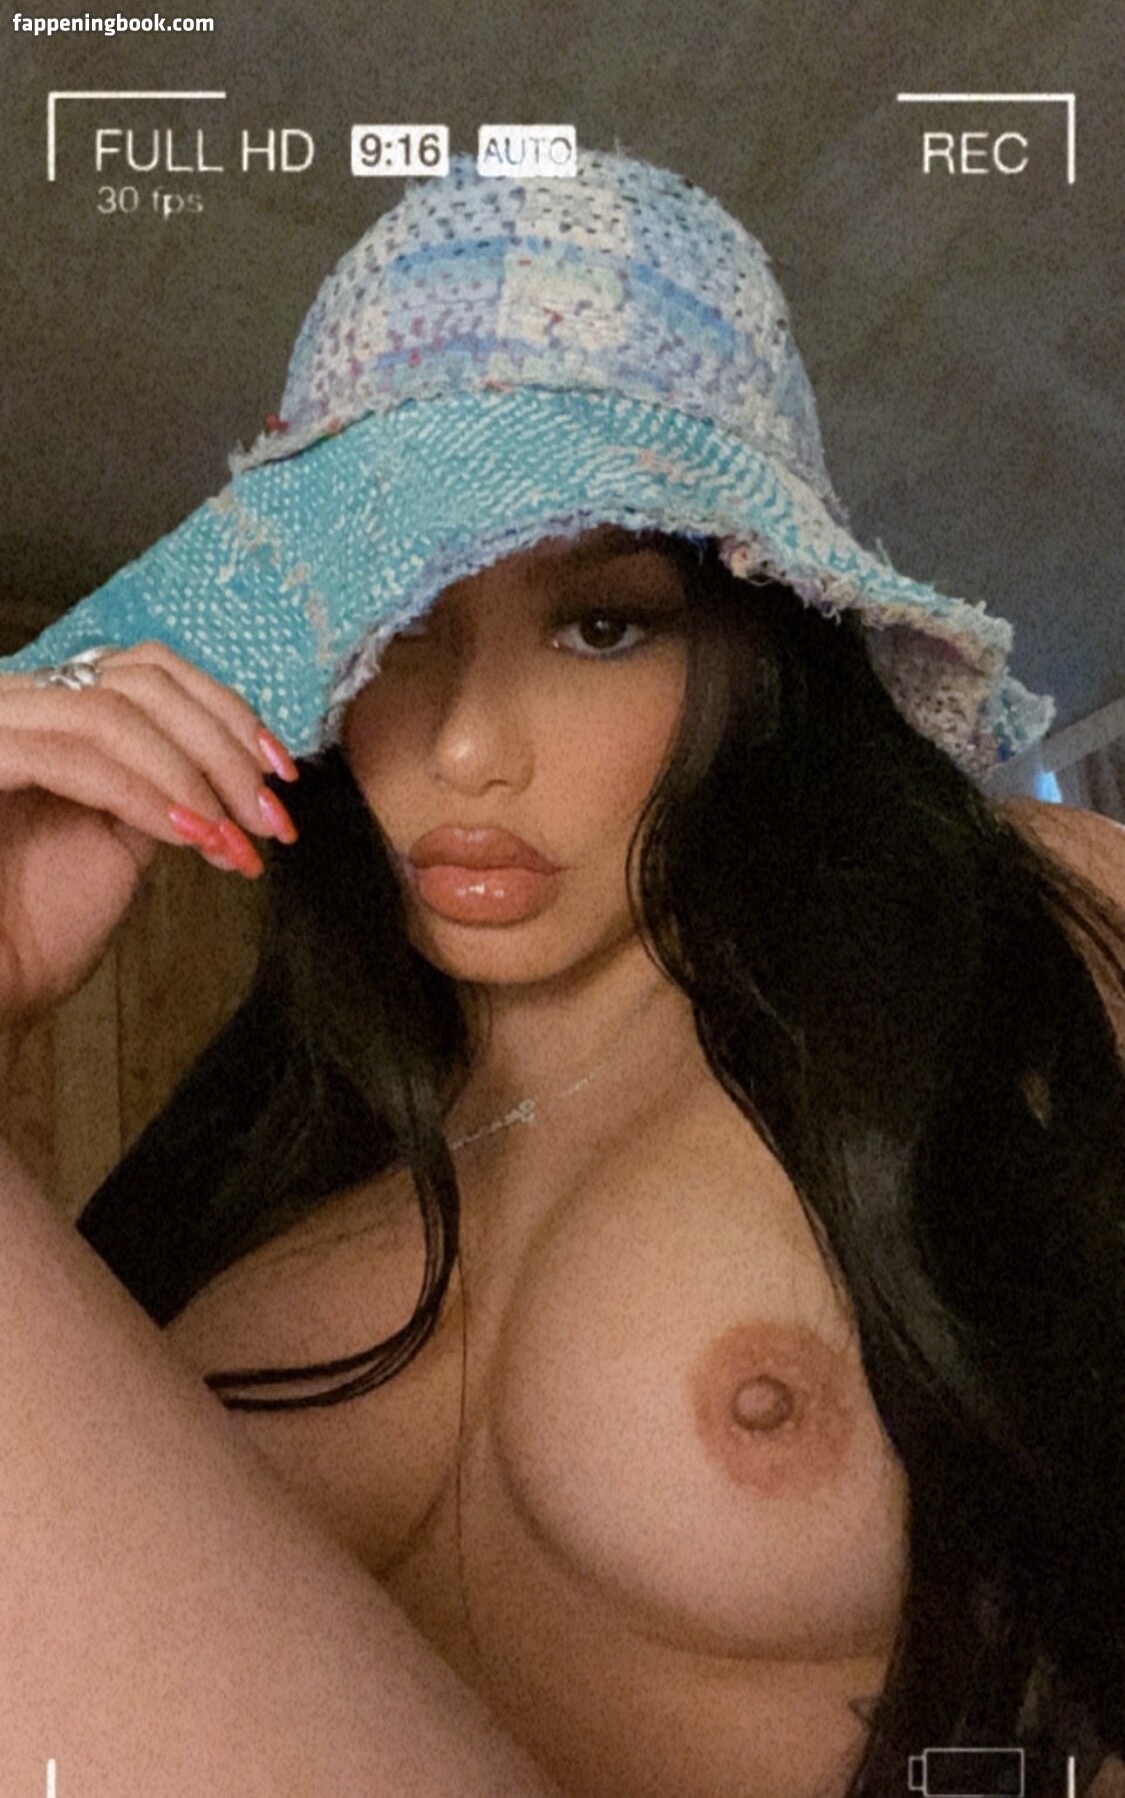 Yahaira Yumi / yahairayumi Nude, OnlyFans Leaks, The Fappening - Photo  #1623234 - FappeningBook